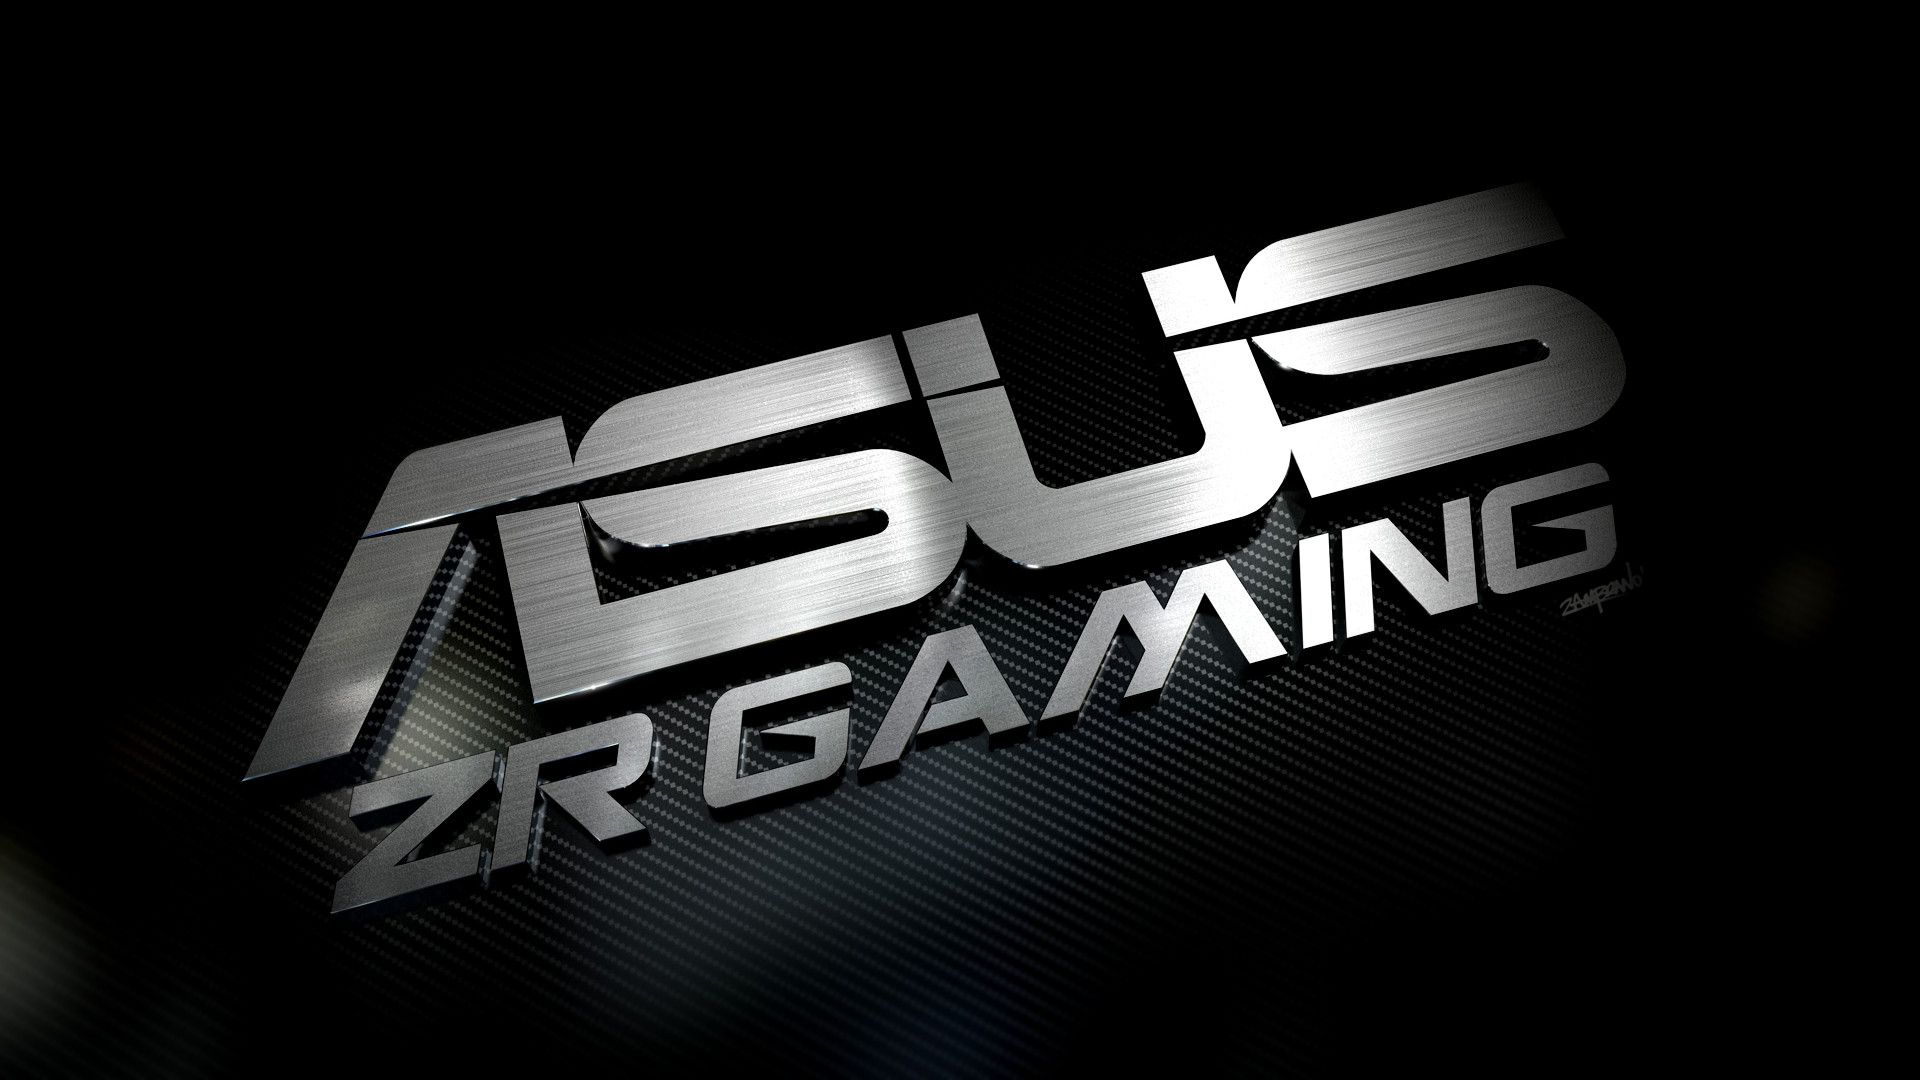 Download Asus Zr Gaming Wallpaper Full HD Backgrounds